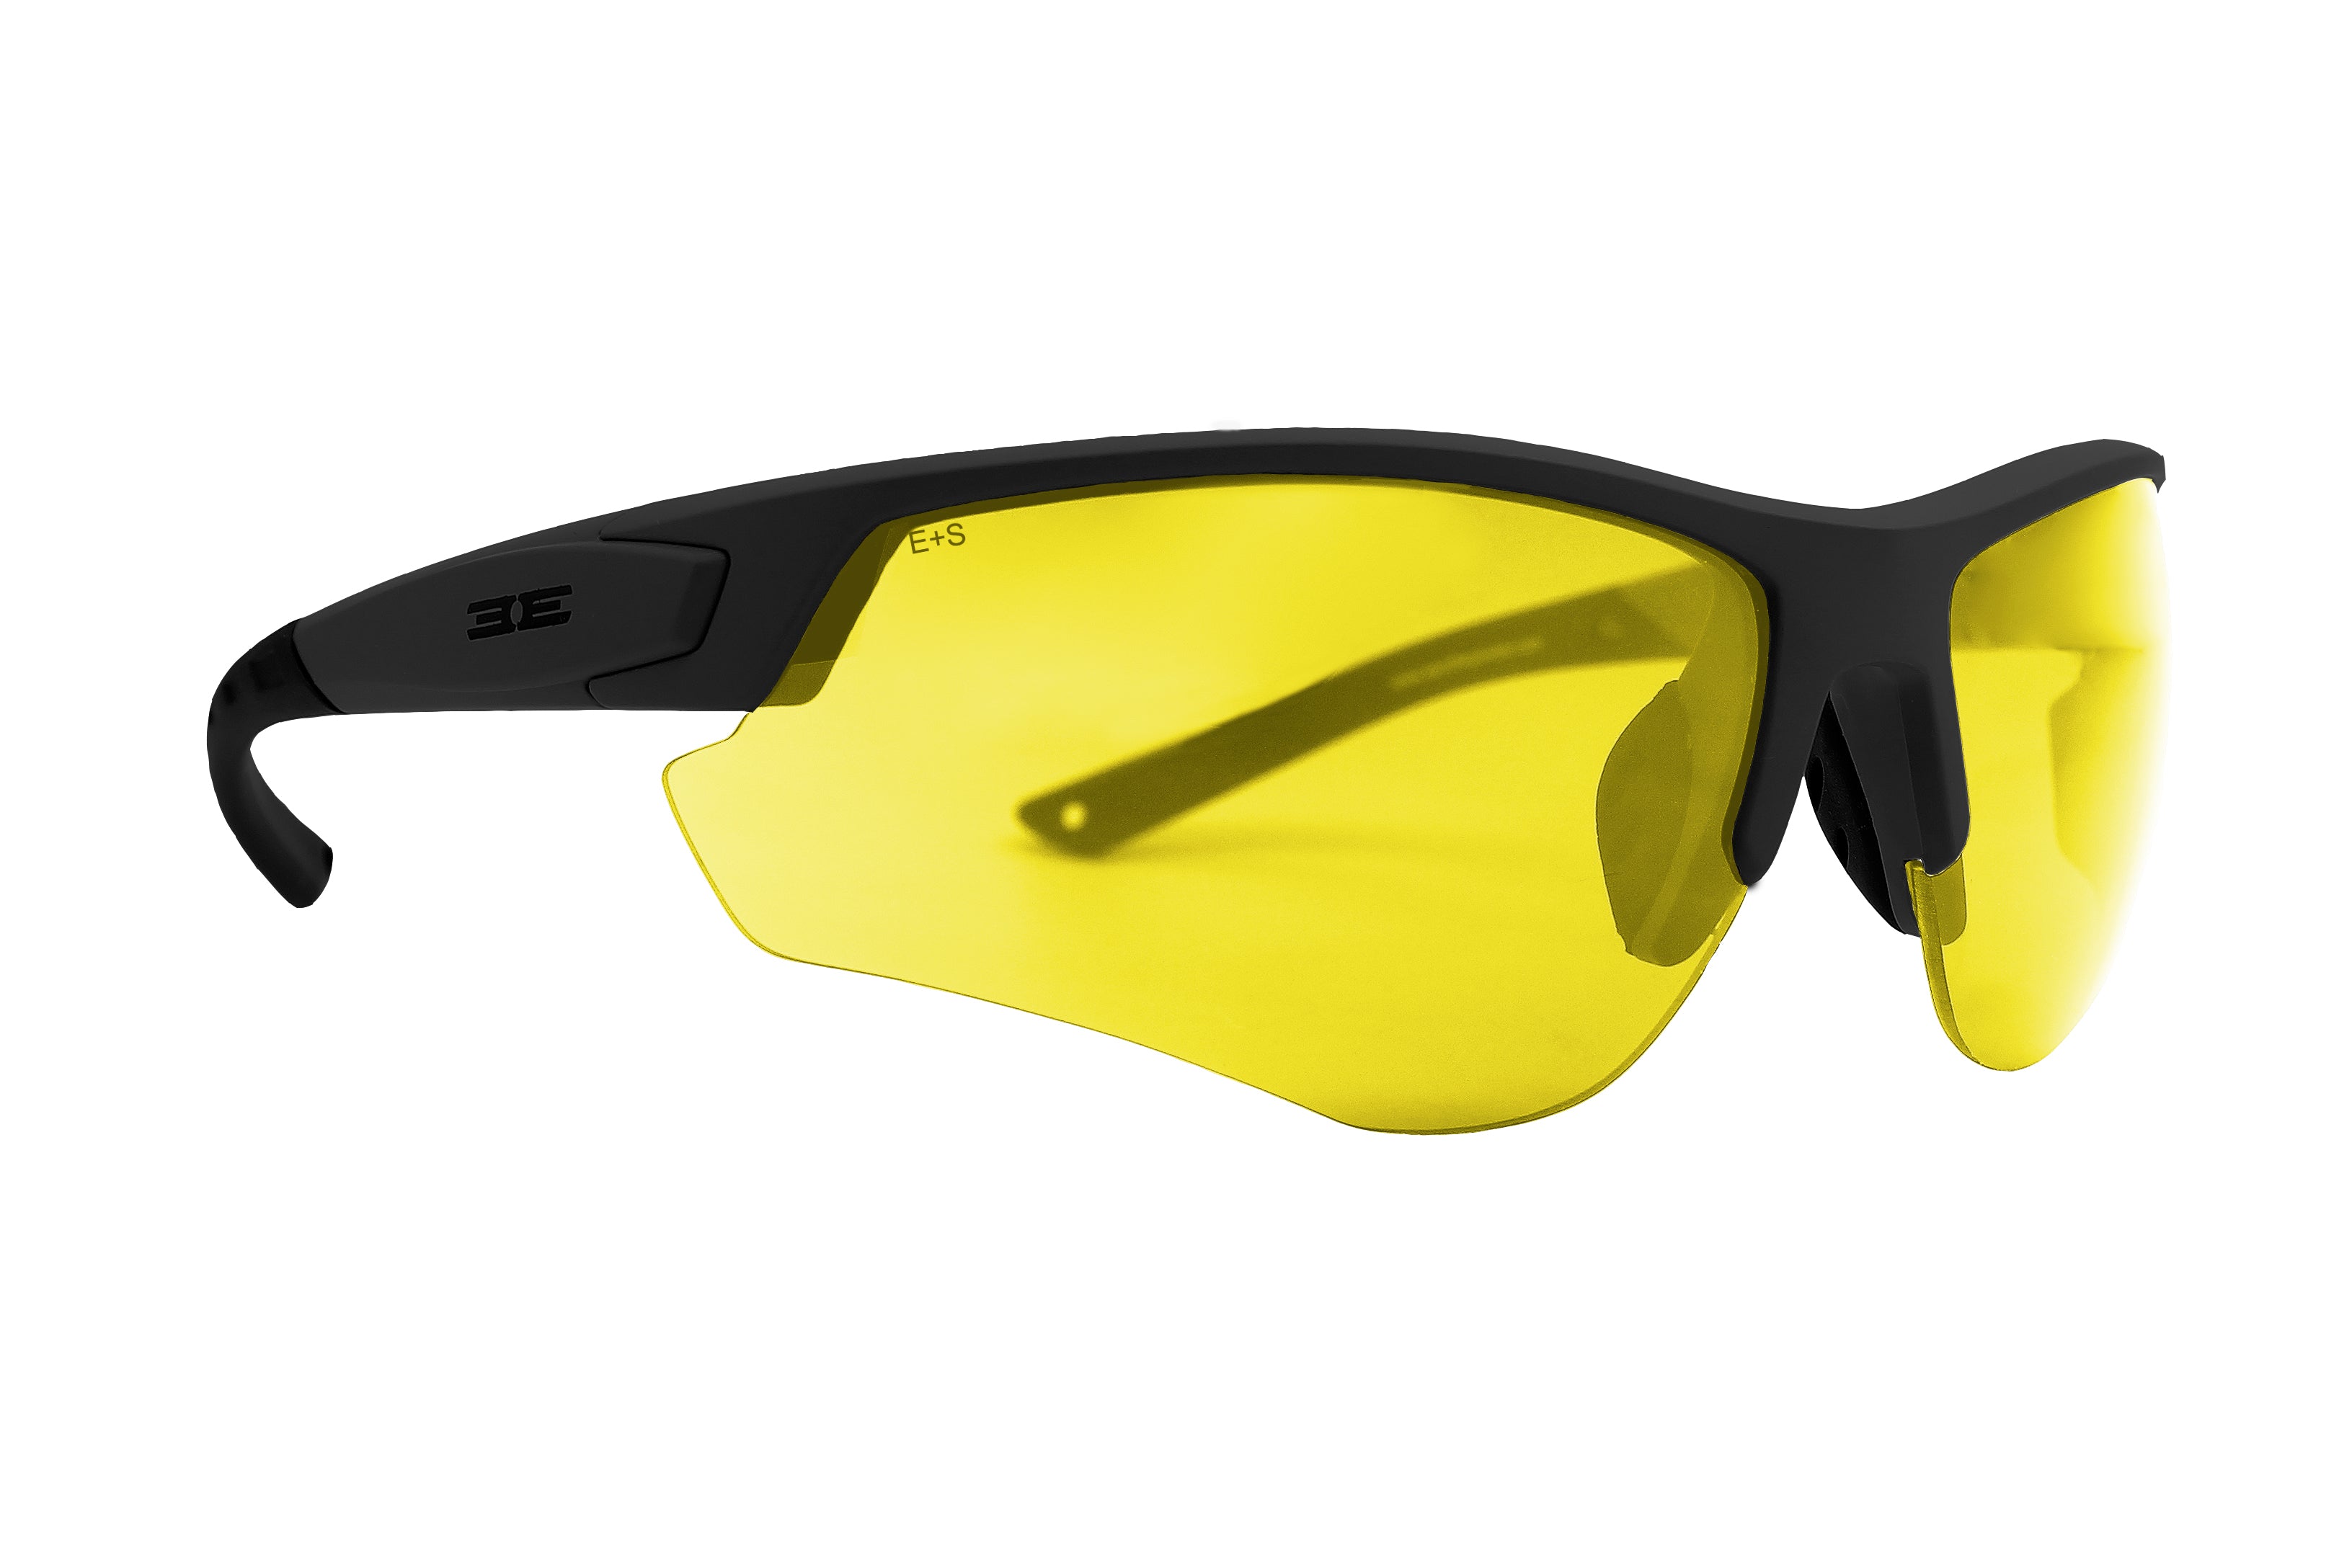 Grunt Tactical Sport Sunglasses with black frame and yellow lenses by Epoch Eyewear